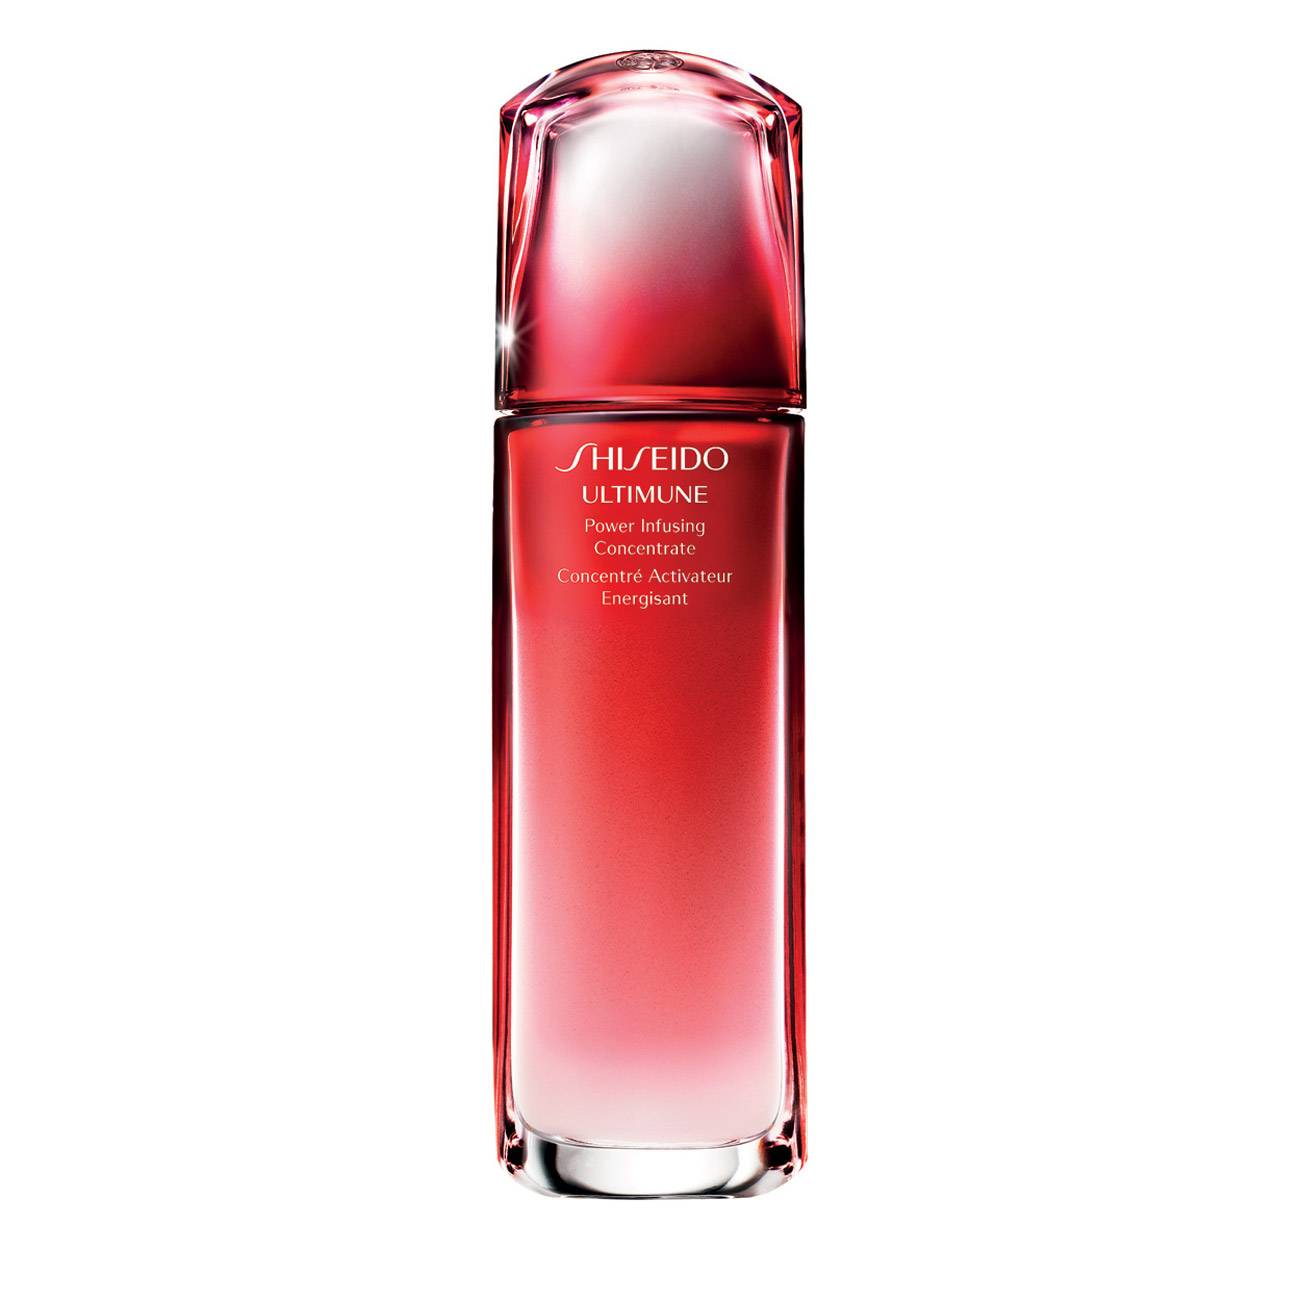 ULTIMUNE POWER INFUSING CONCENTRATE 100ml poza